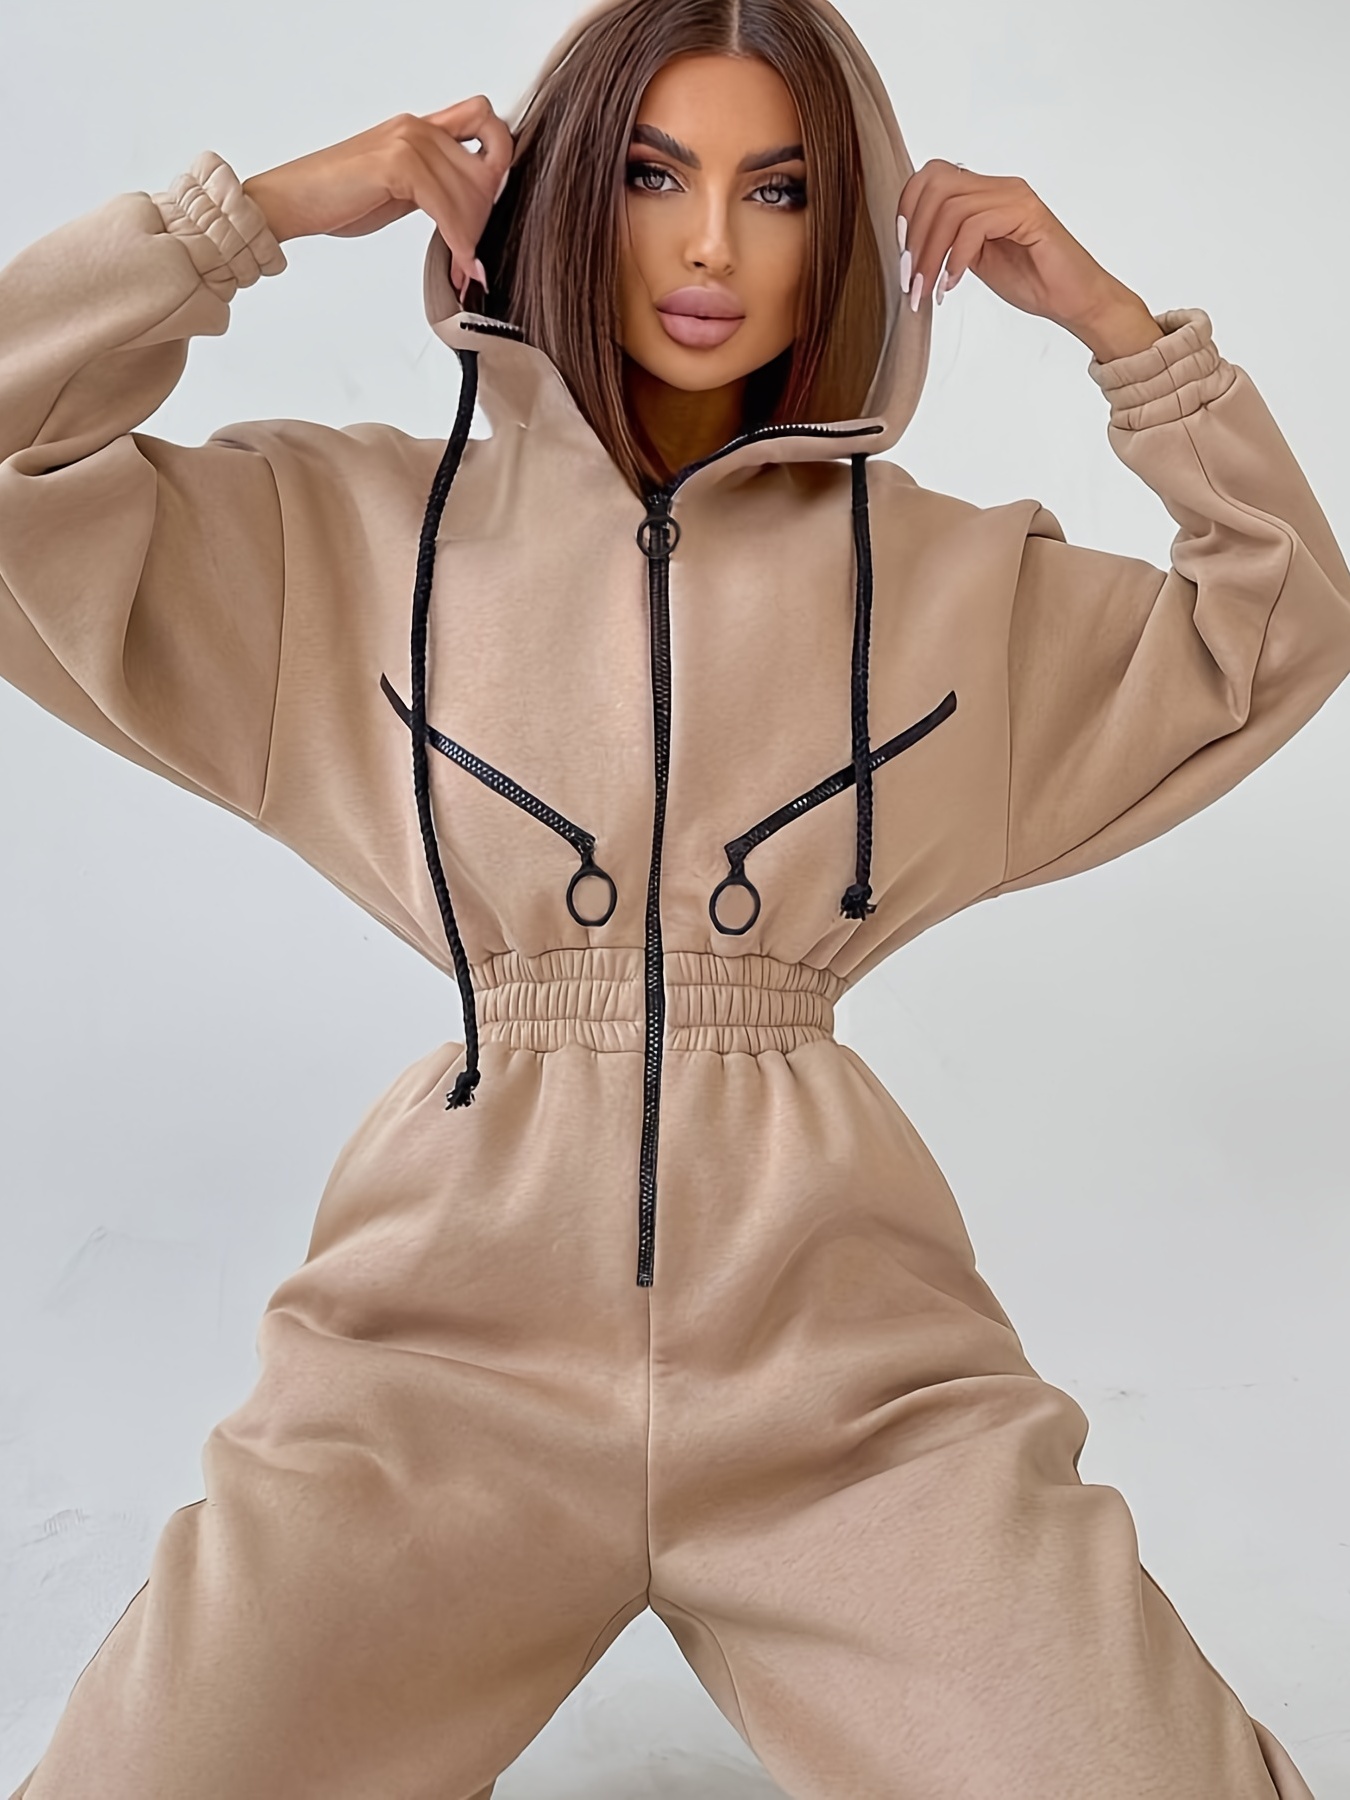 Sexy Jersey Romper Jumpsuit Hoodie with Hoodie Zip Up Cinched